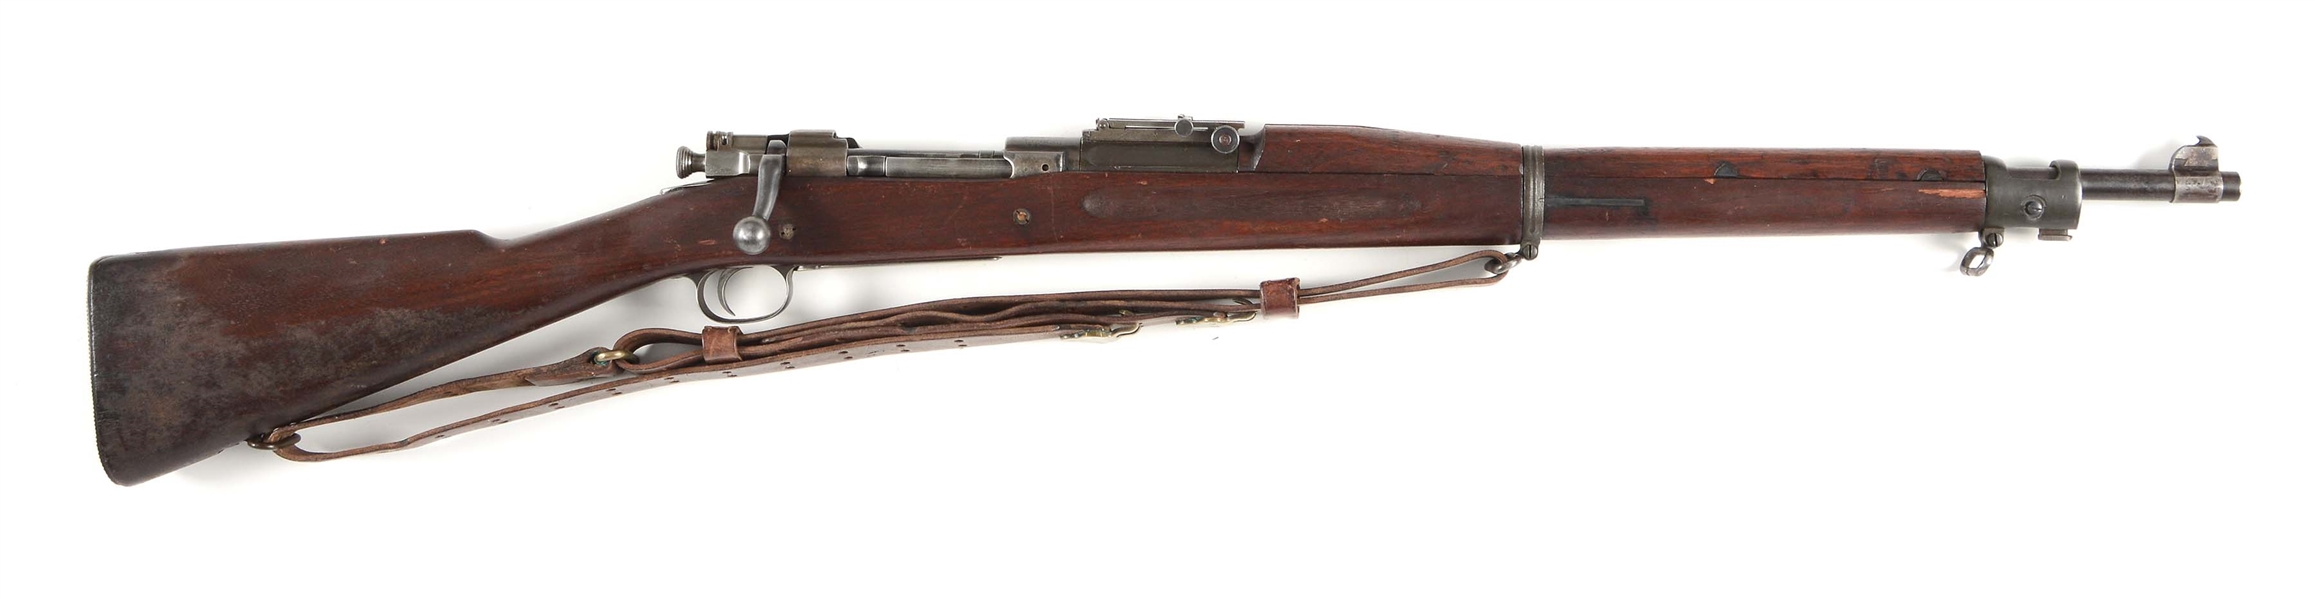 (C) US SPRINGFIELD ARMORY MODEL 1903 BOLT ACTION RIFLE.